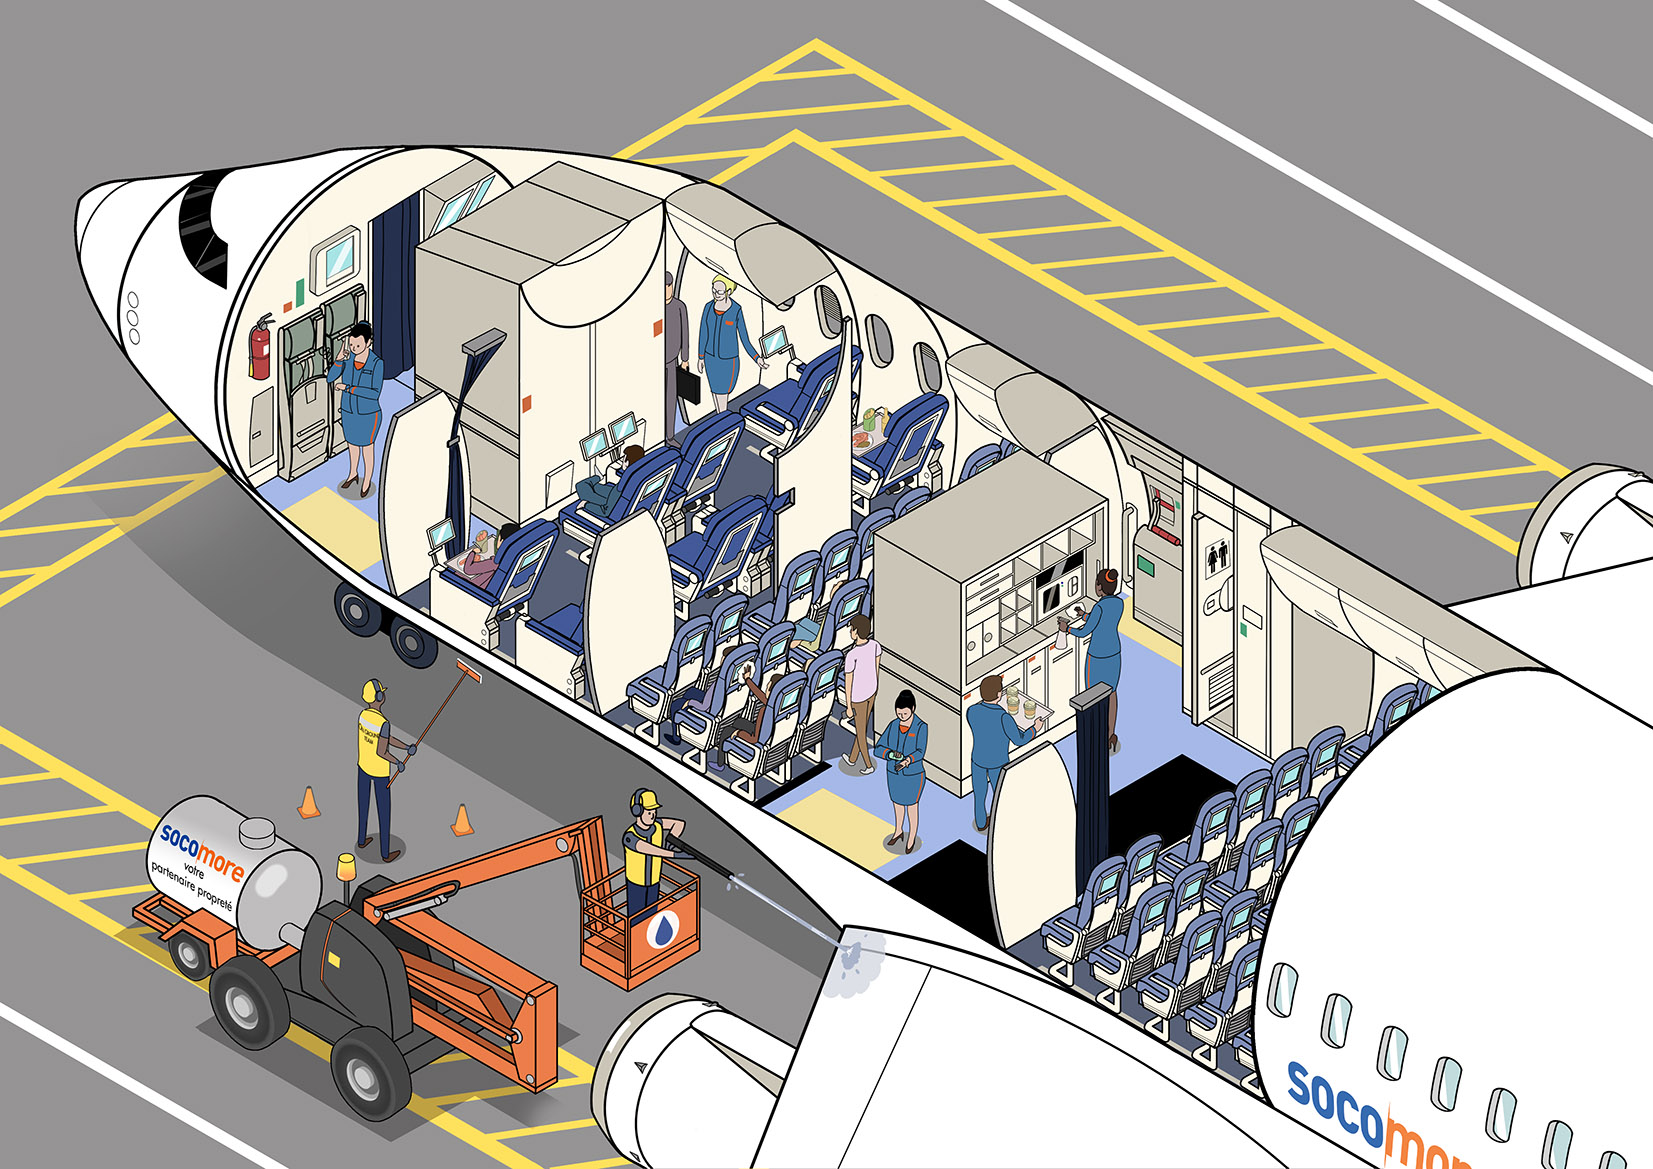 Cleaning operations during in line maintenance for interior and exterior aircraft